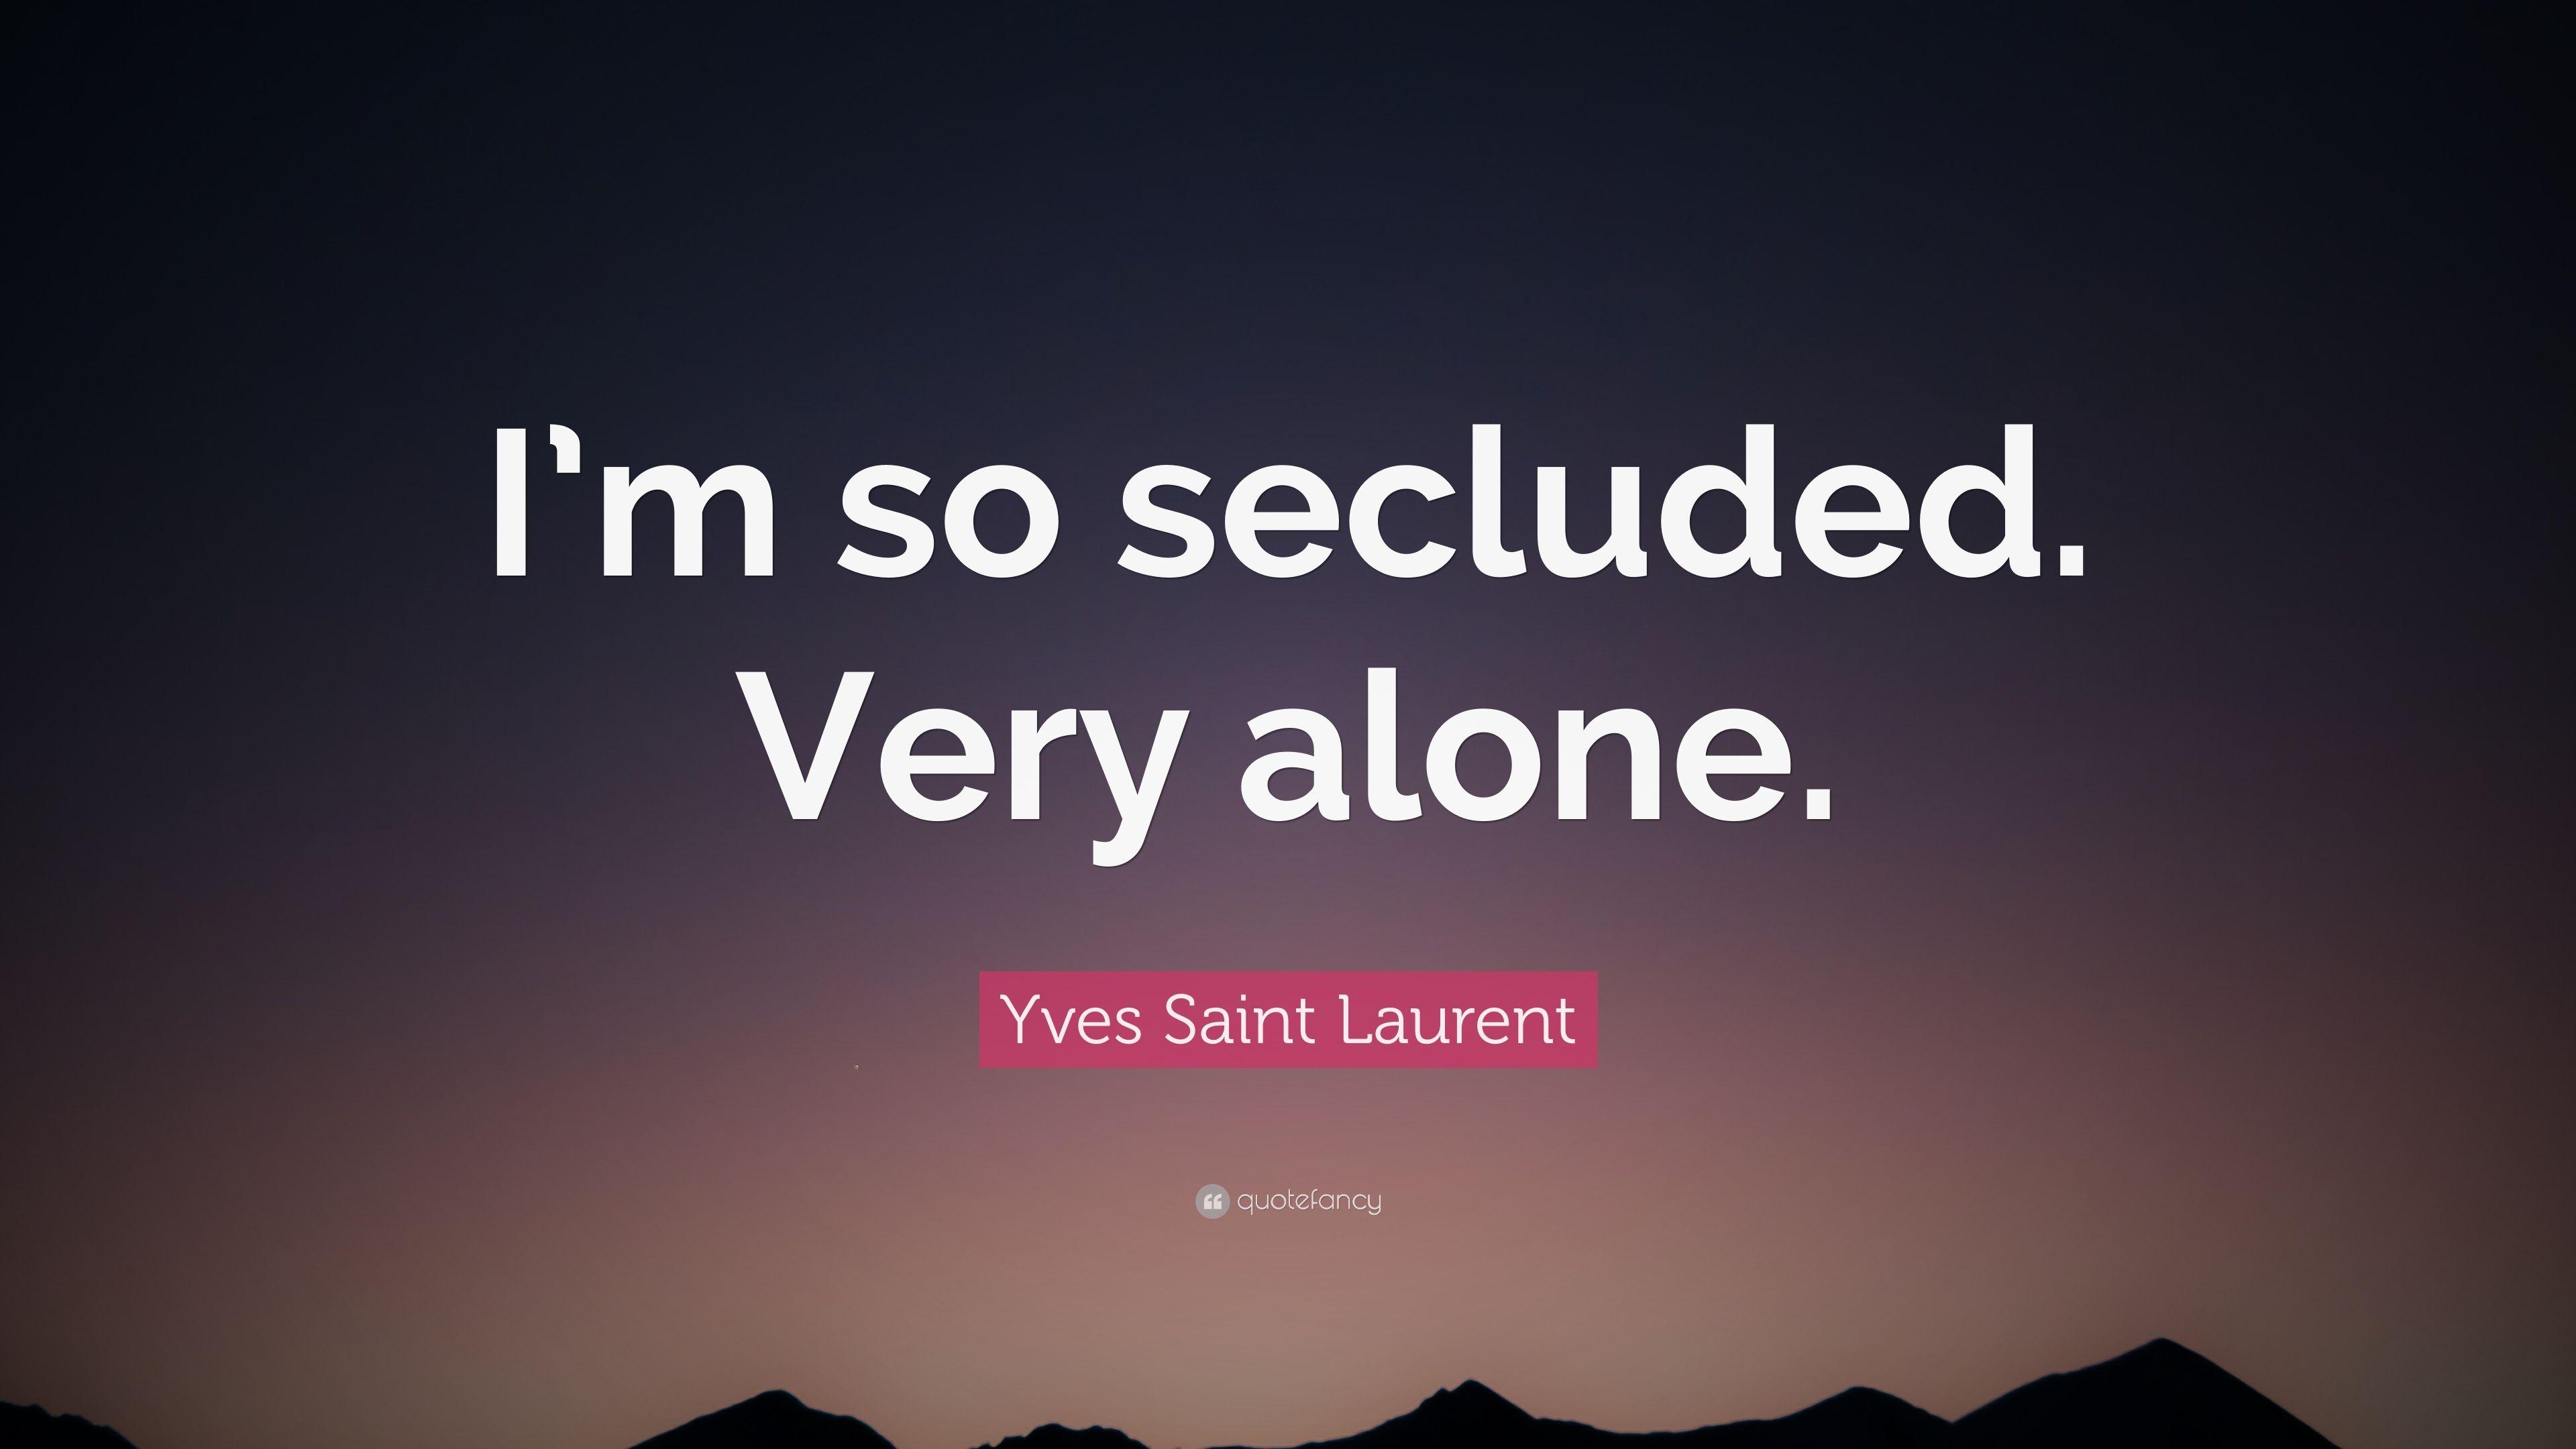 Yves Saint Laurent Quote: “I'm so secluded. Very alone.” 7